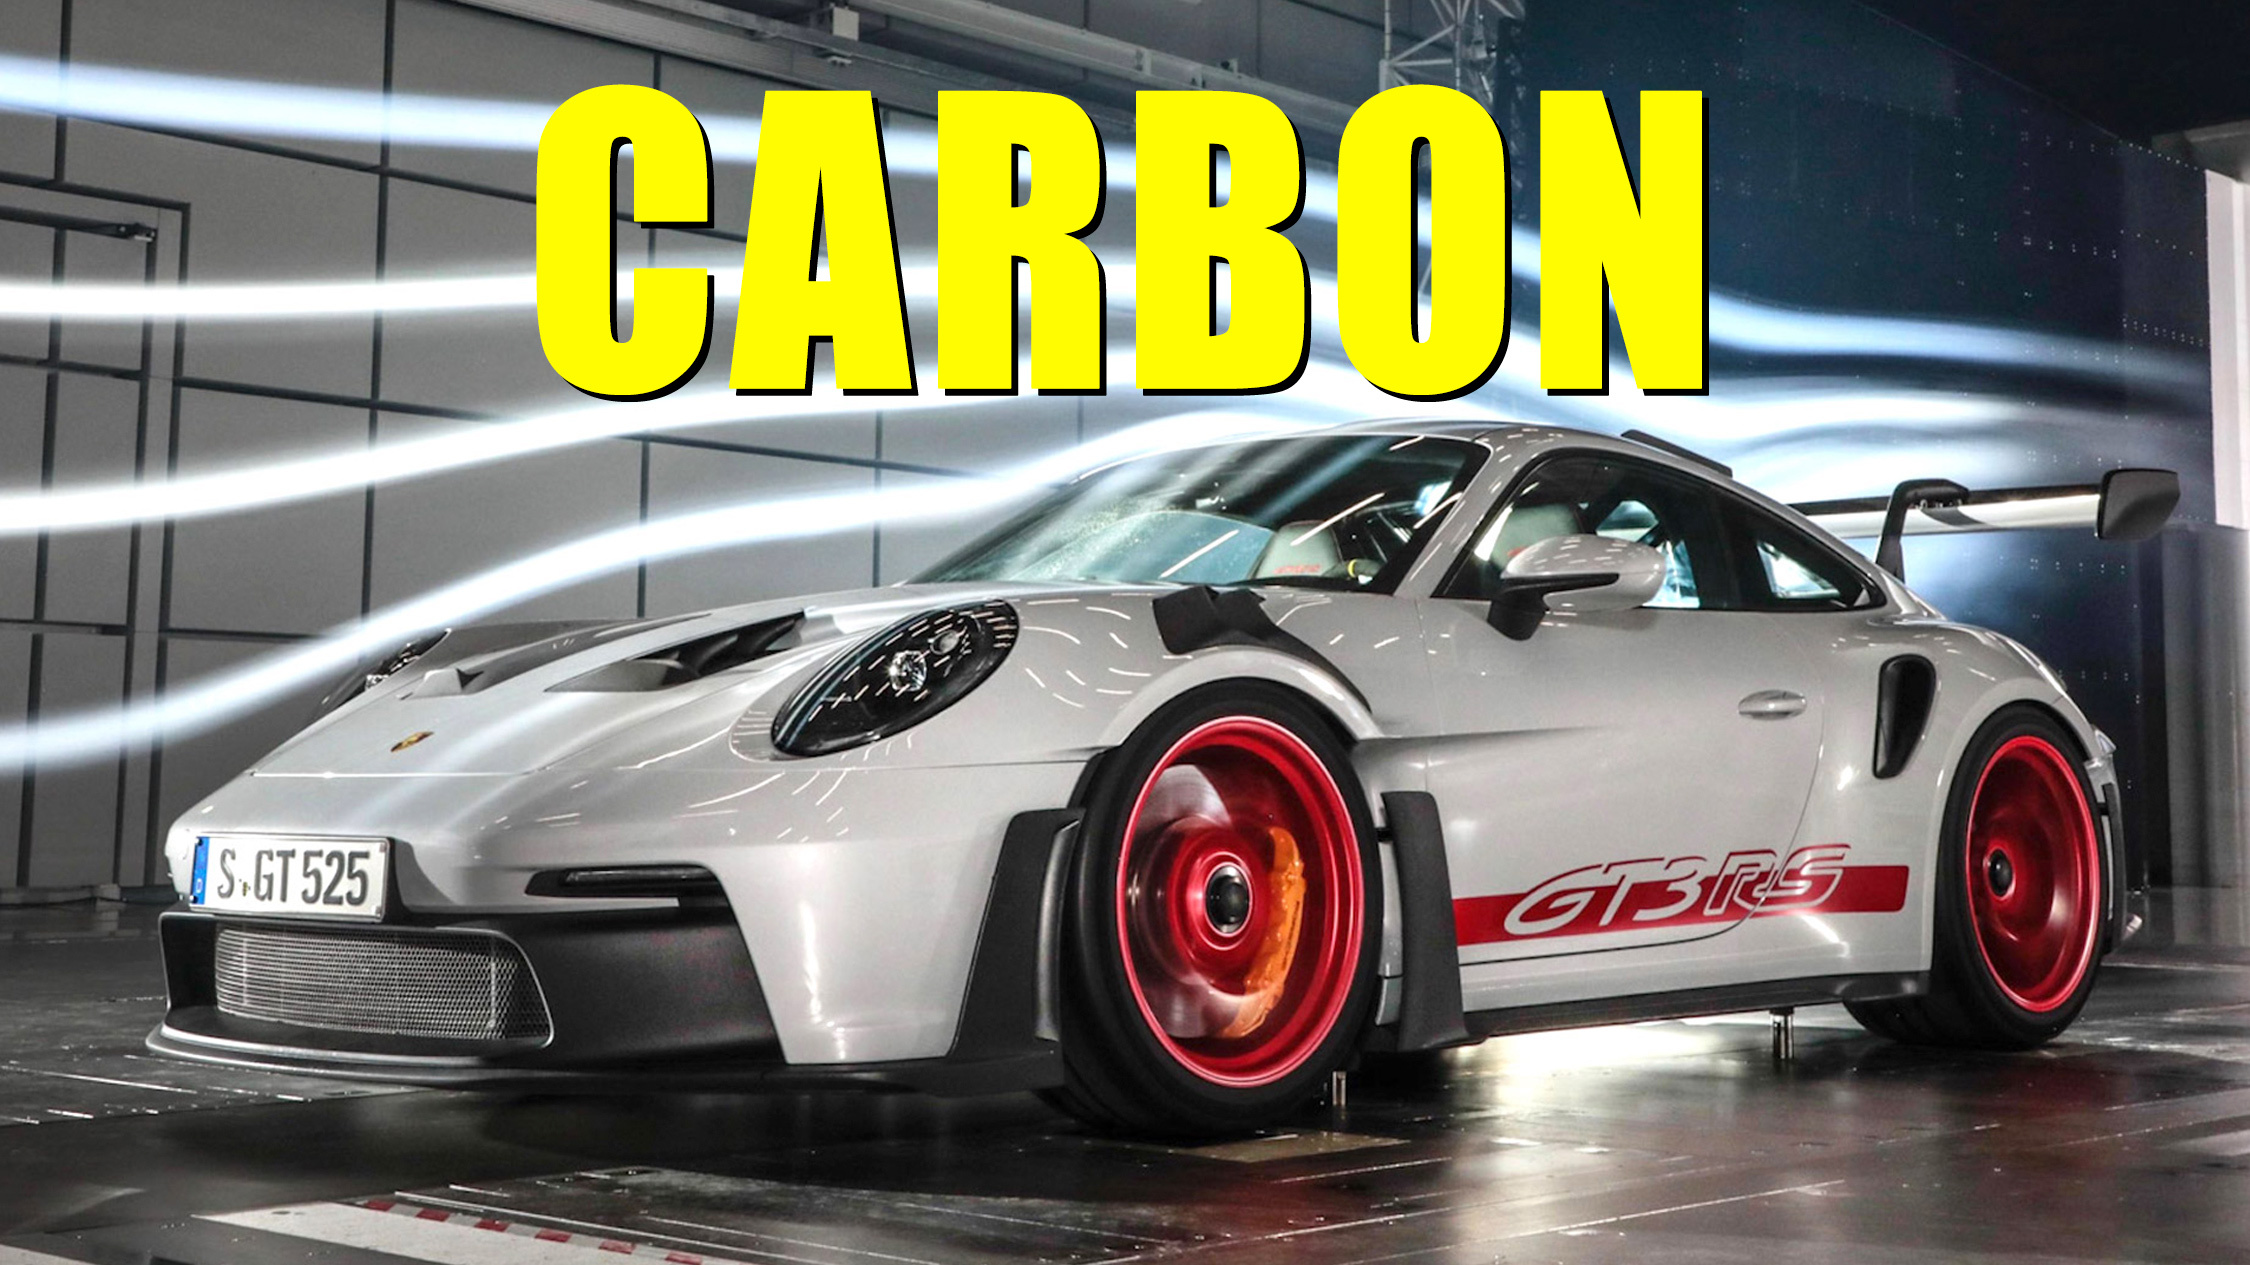 New Porsche 911 GT3 R gets 4.2-liter flat six, aero and chassis